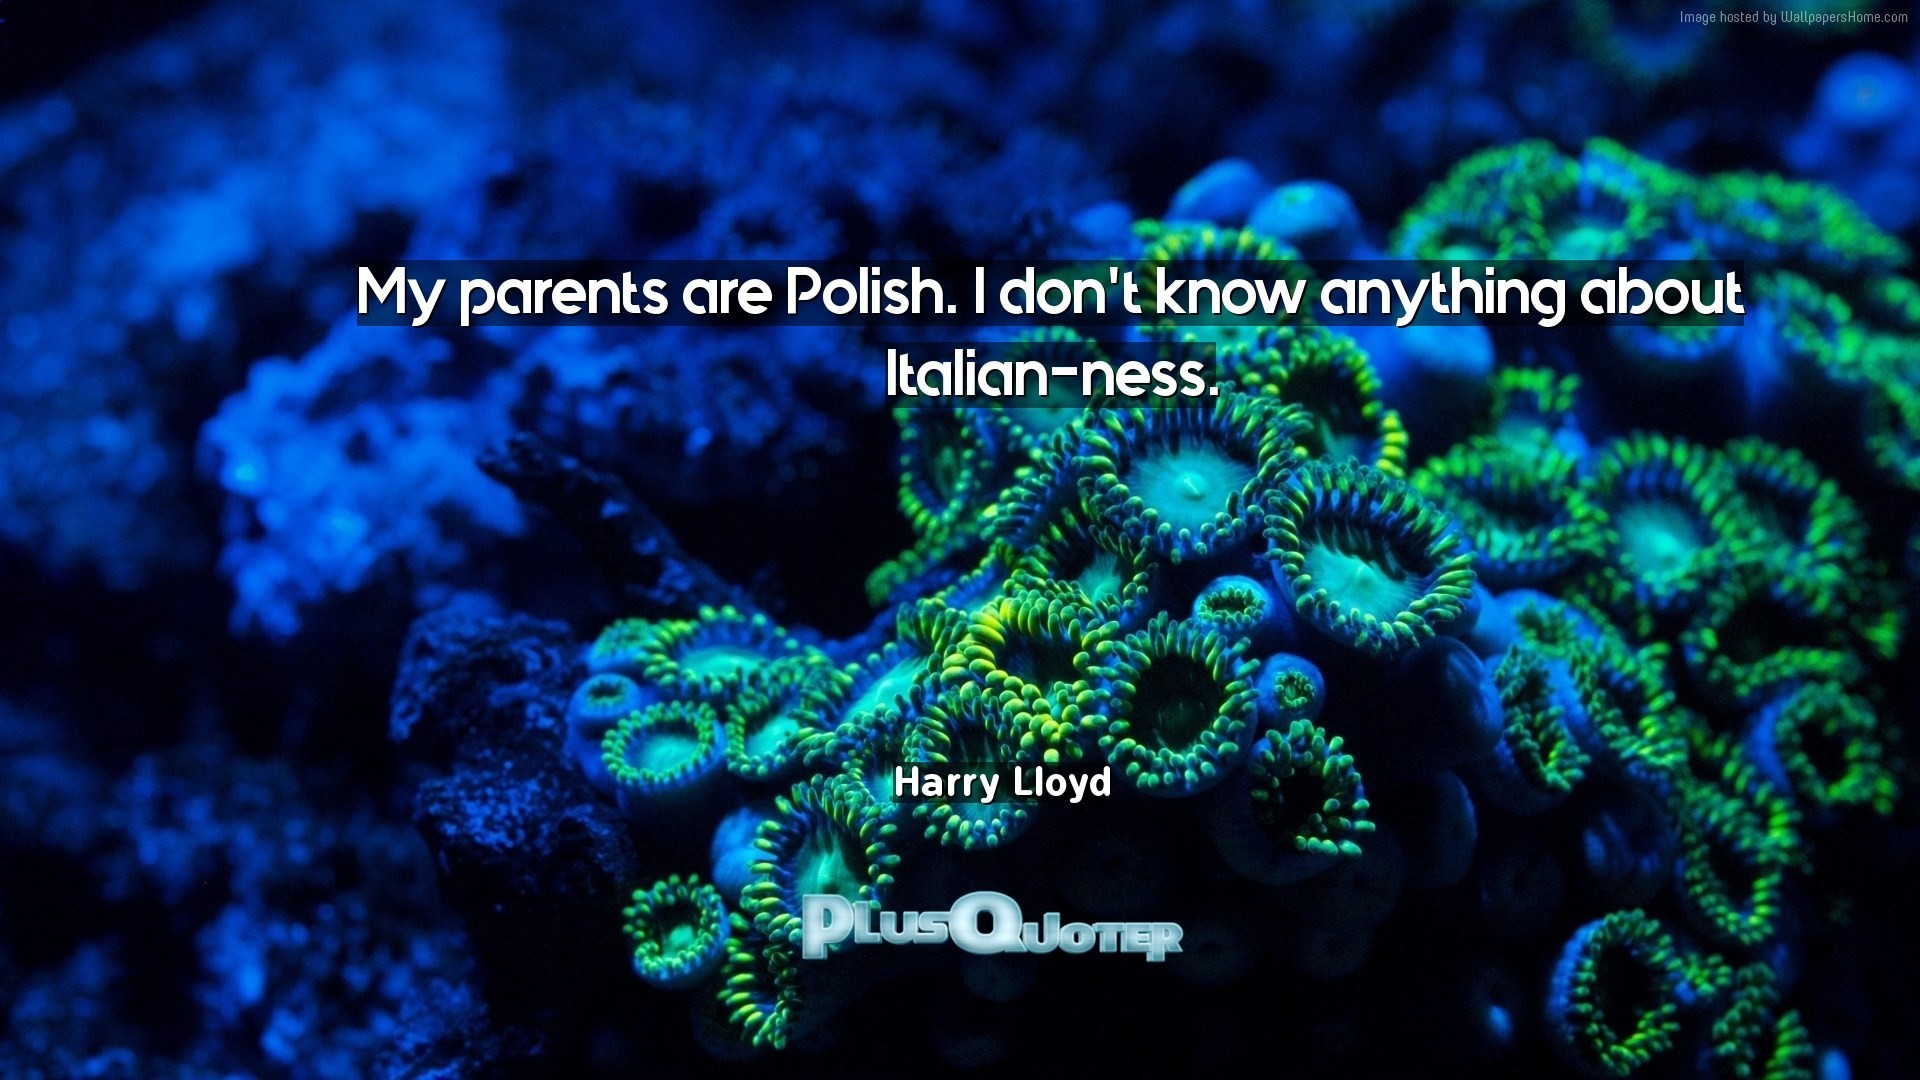 1920x1080 Download Wallpaper with inspirational Quotes- "My parents are Polish. I don